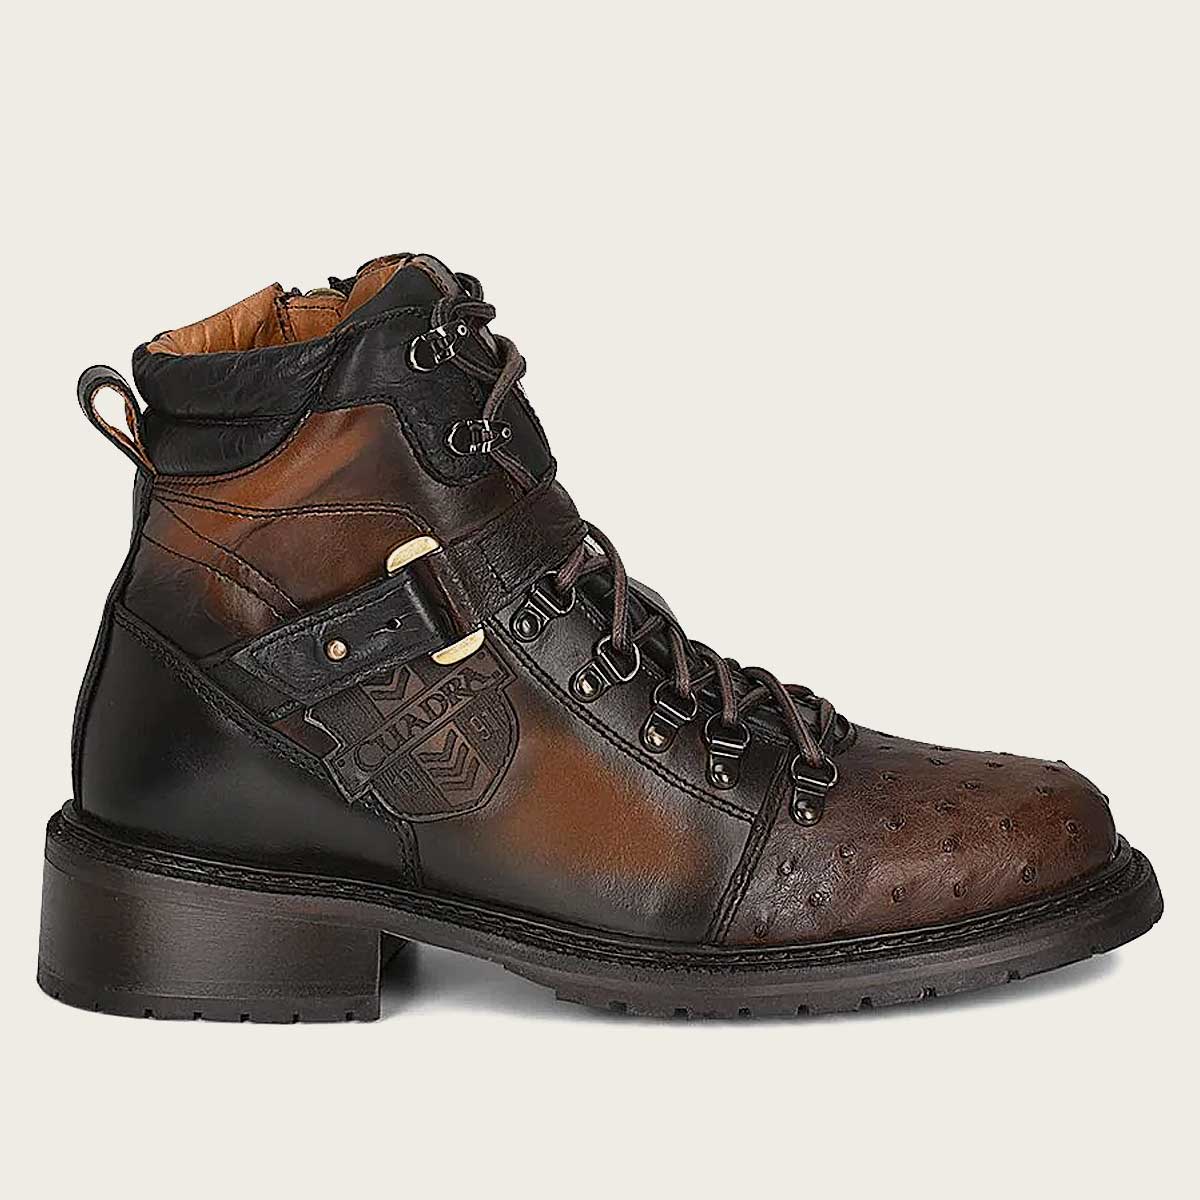 Cuadra brown ostrich leather urban ankle boots